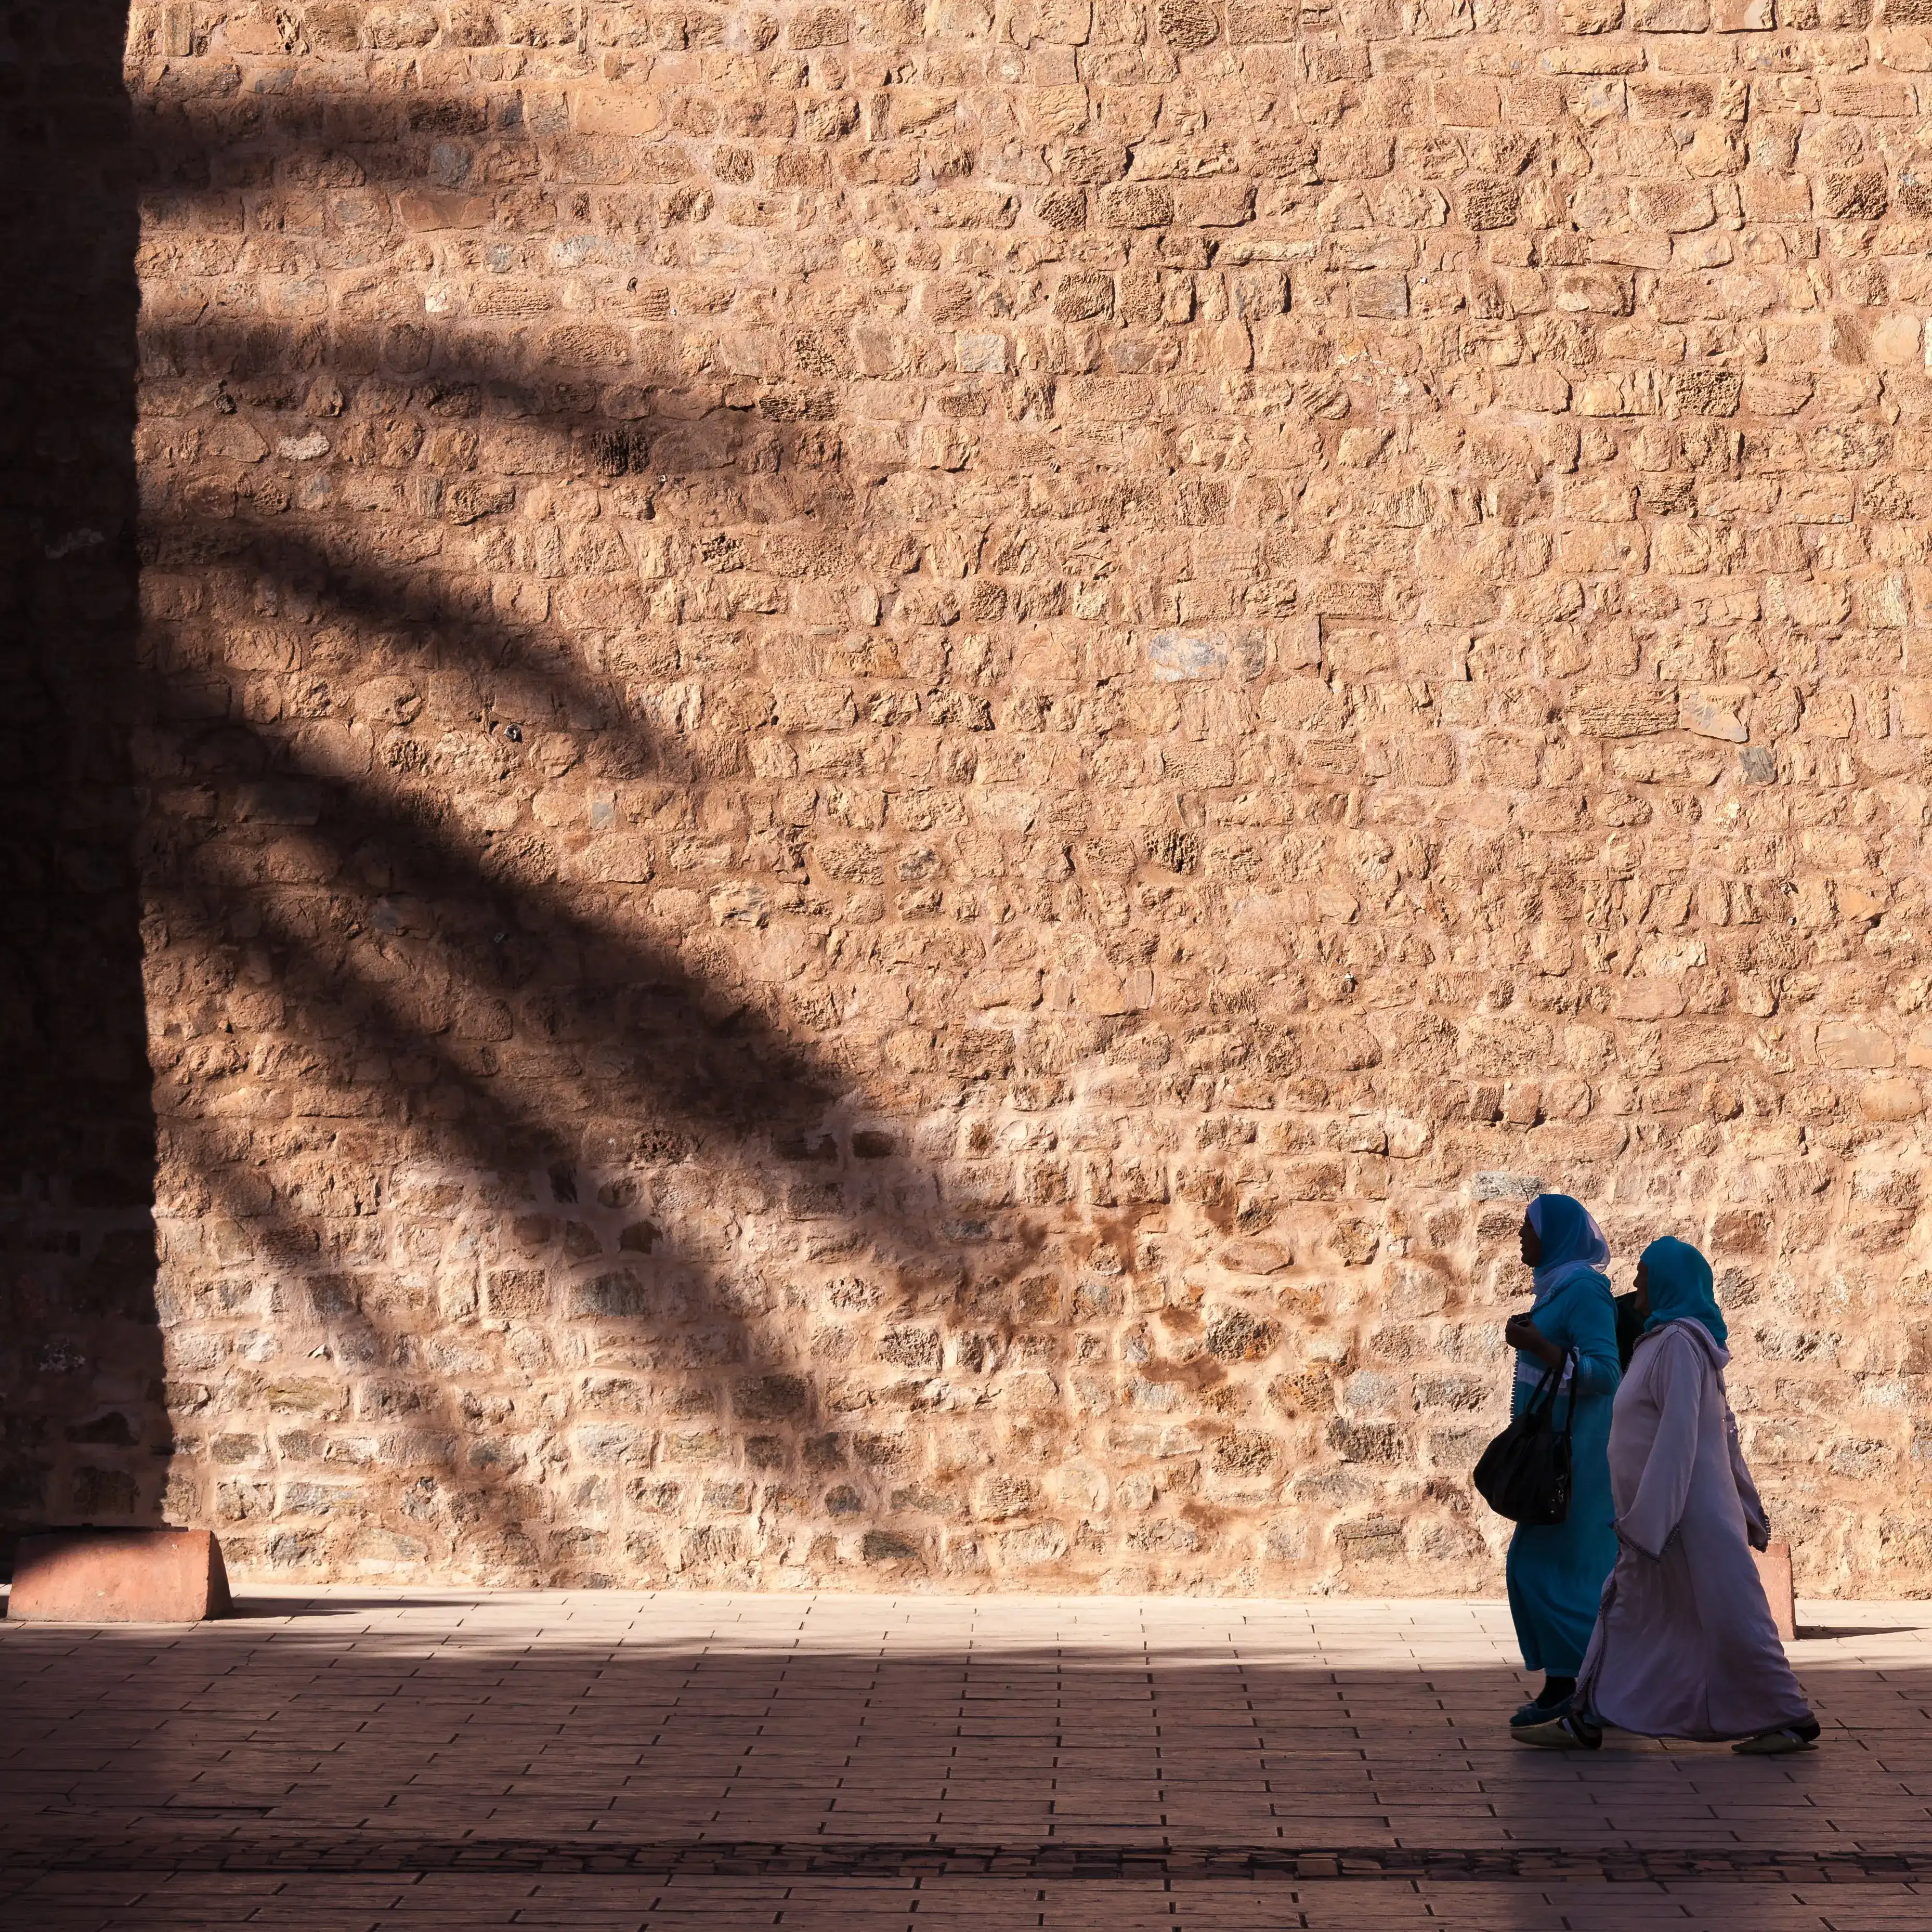 Shadows on a wall and pedestrians in Marrakech